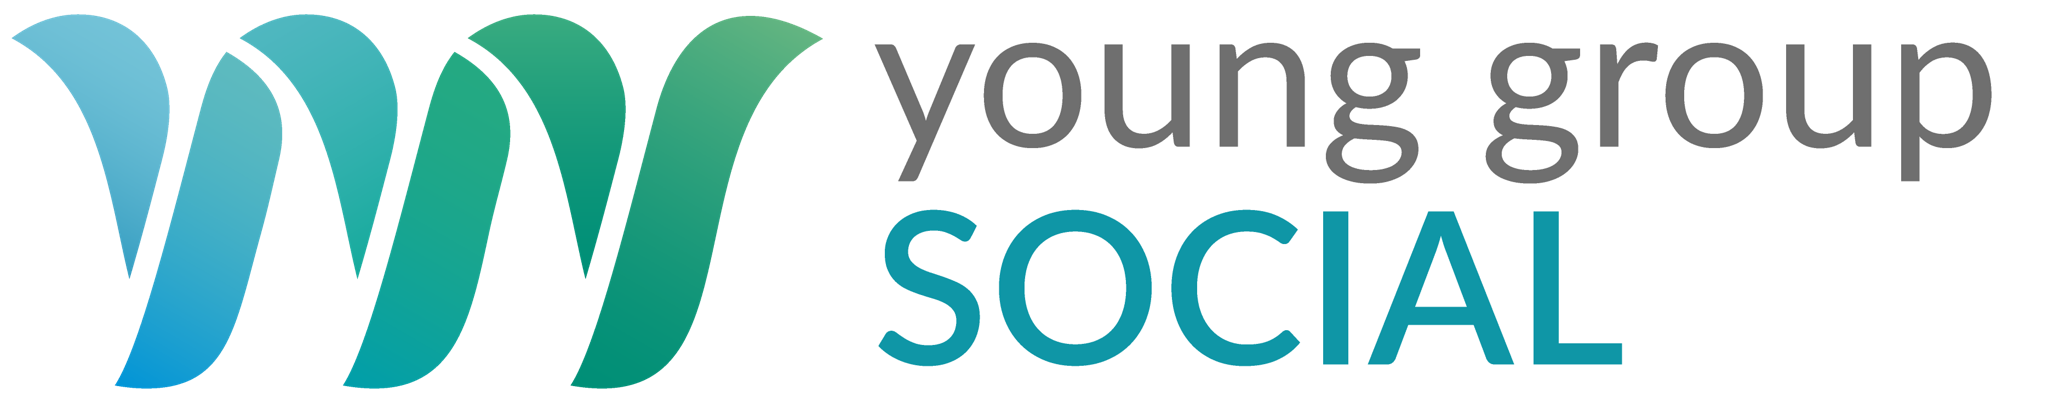 Yes jobs. YOUSOCIAL логотип. Yang Group. Young Society. Project Group logo.